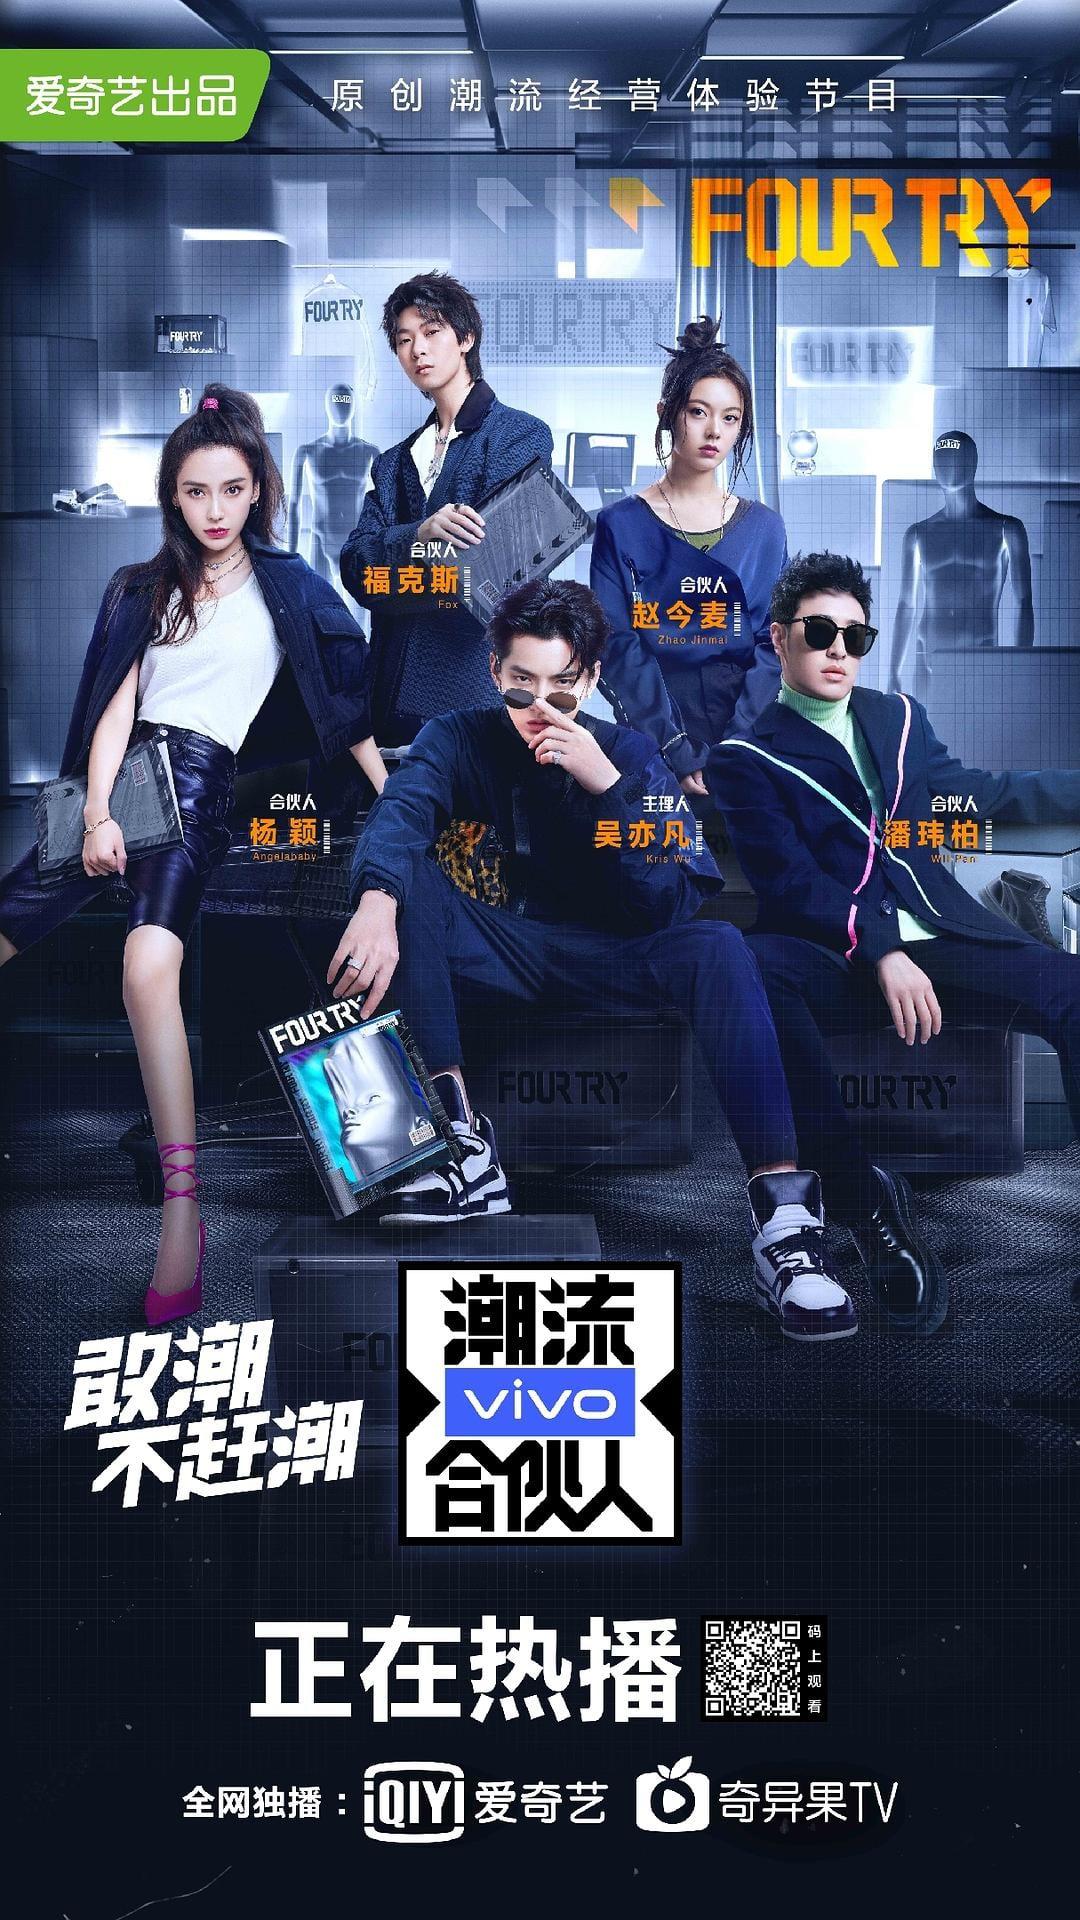 TV ratings for Four Try(潮流合伙人) in Thailand. iqiyi TV series